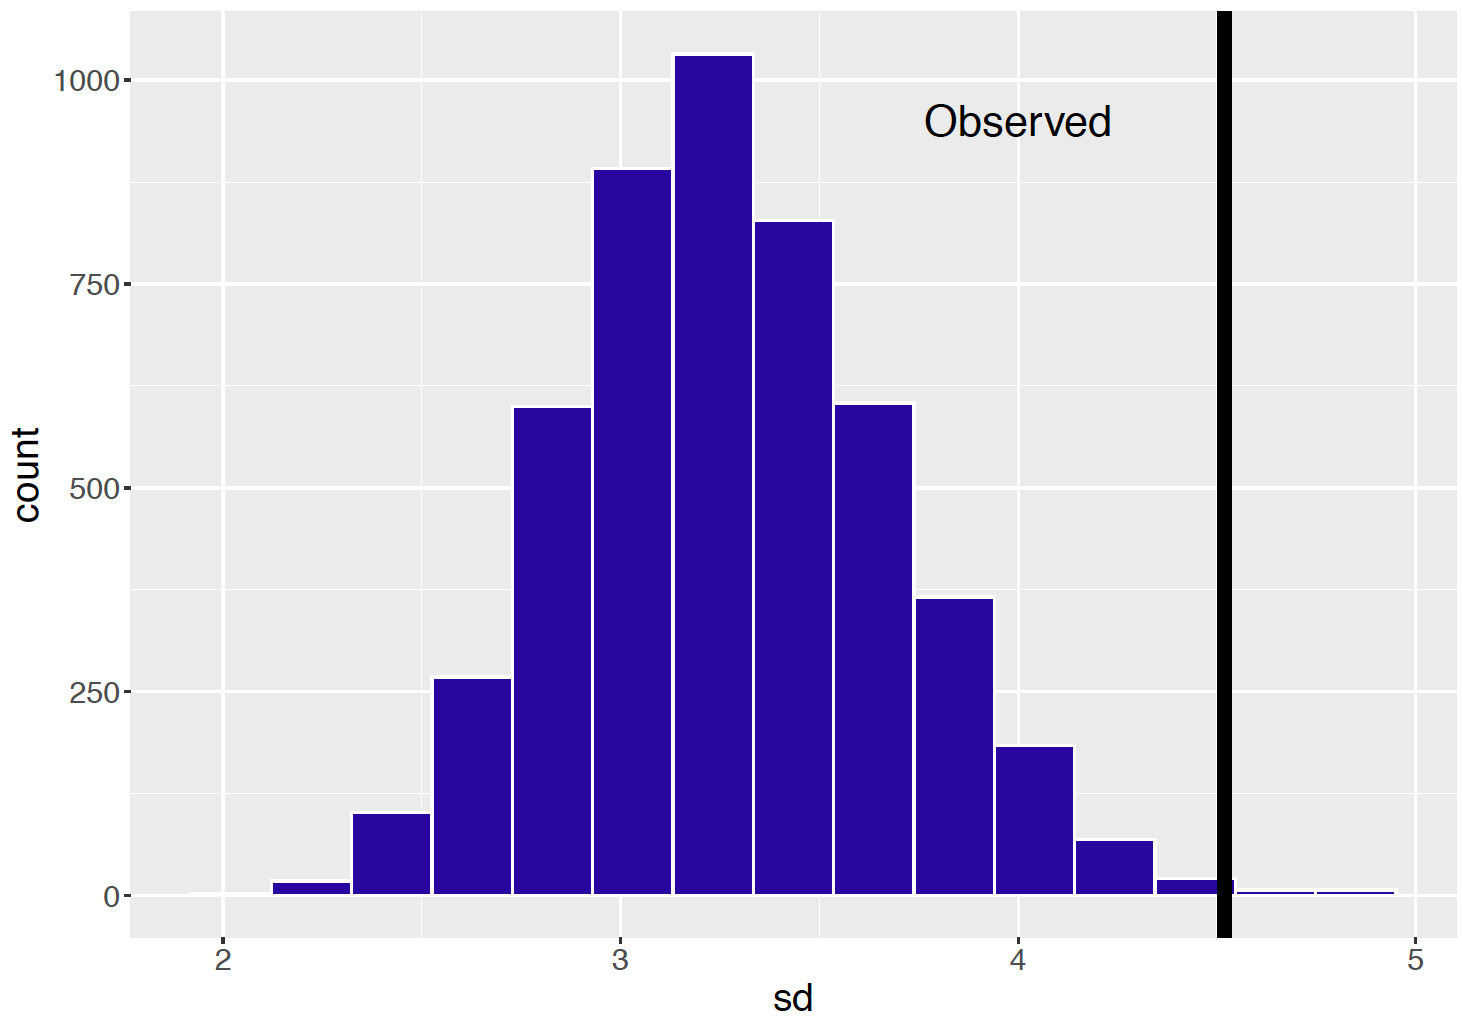 Histogram of standard deviations from 5000 replicates from the posterior predictive distribution from the Poisson sampling model.  The observed standard deviation is displayed as a vertical line.